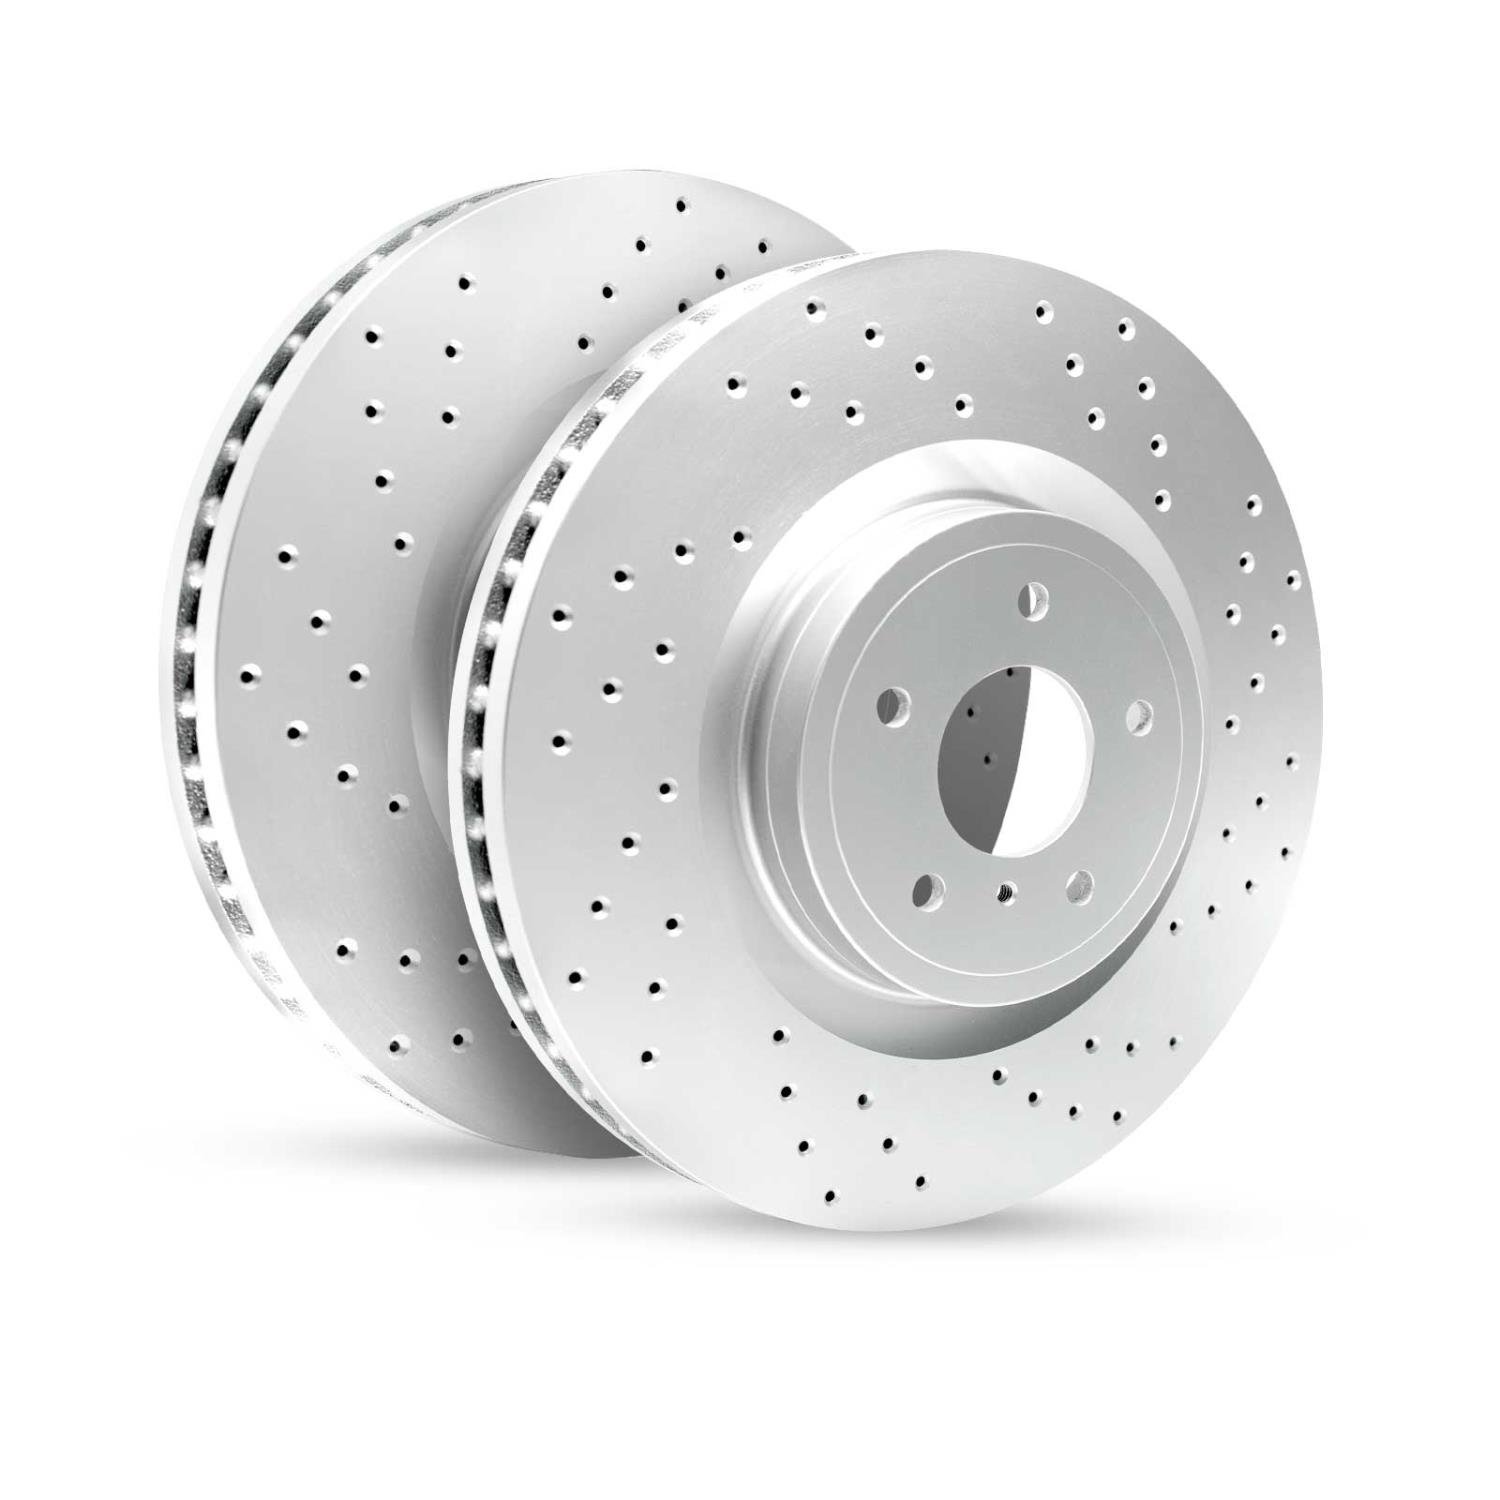 GEO-Carbon Drilled/Slotted Rotors, 2006-2013 BMW, Position: Rear